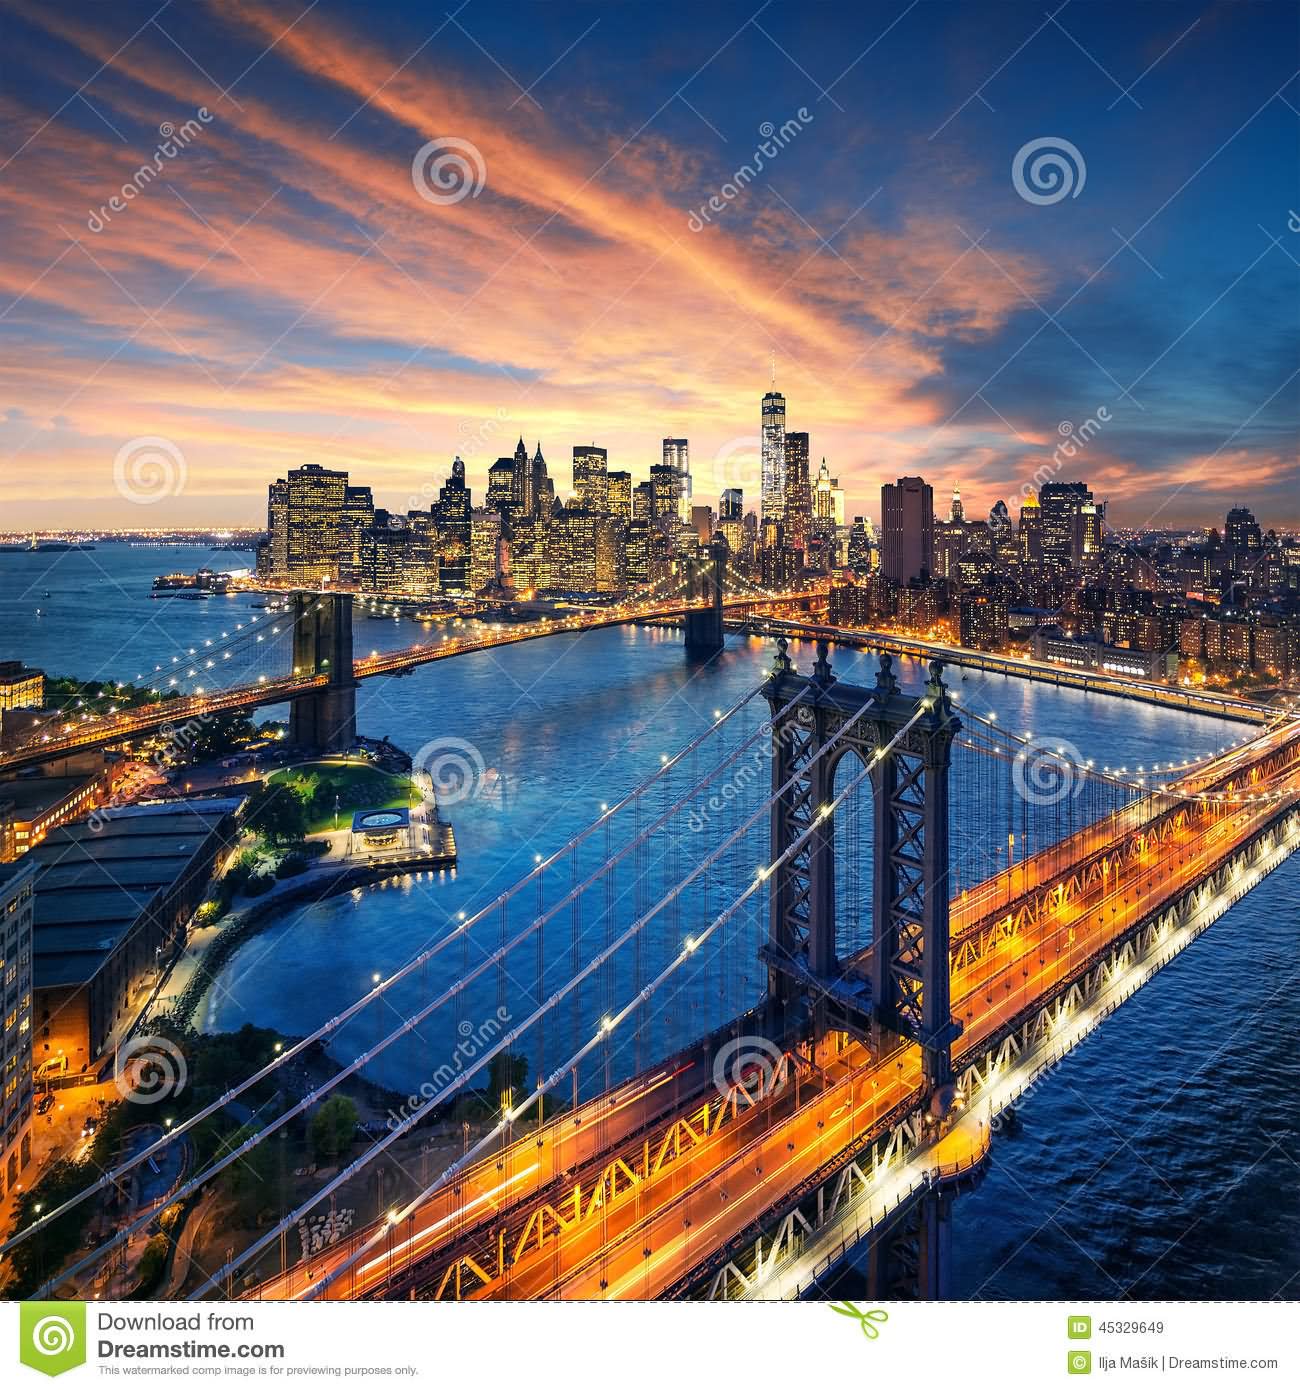 Aerial View Of The Brooklyn Bridge At The Time Of Sunset